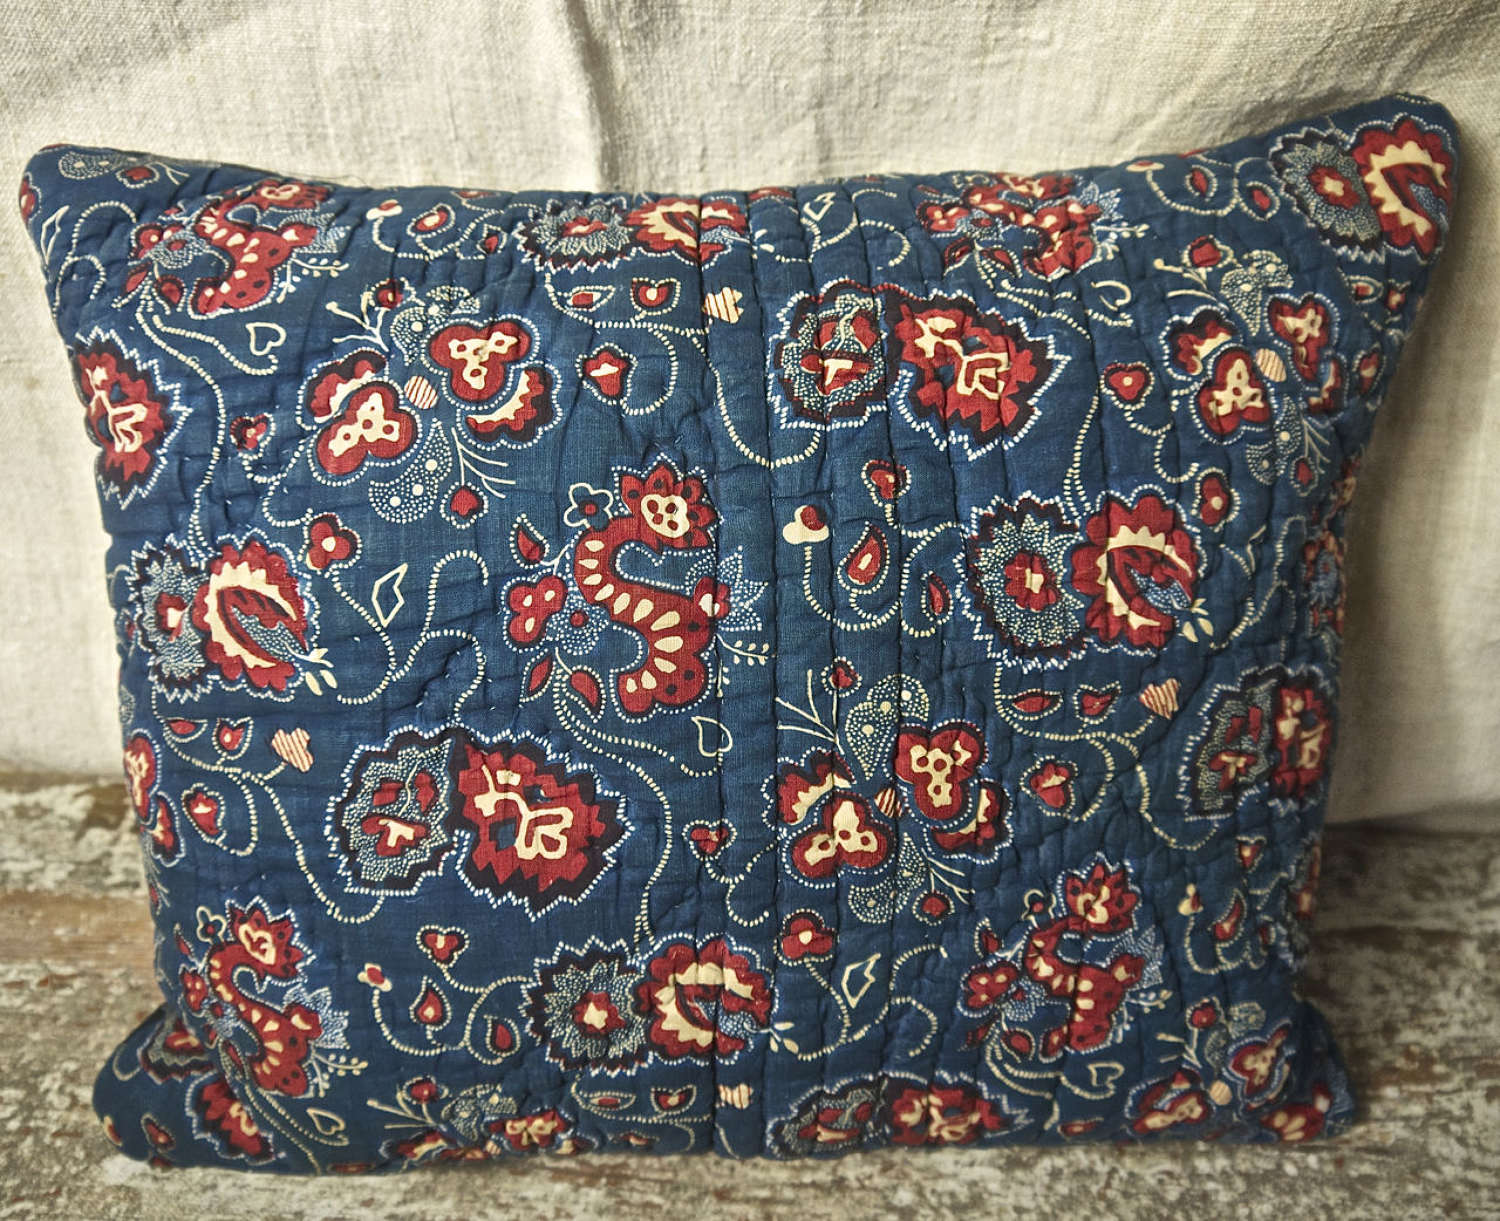 Indigo and Red Quilted Cotton Cushion French c.1790s